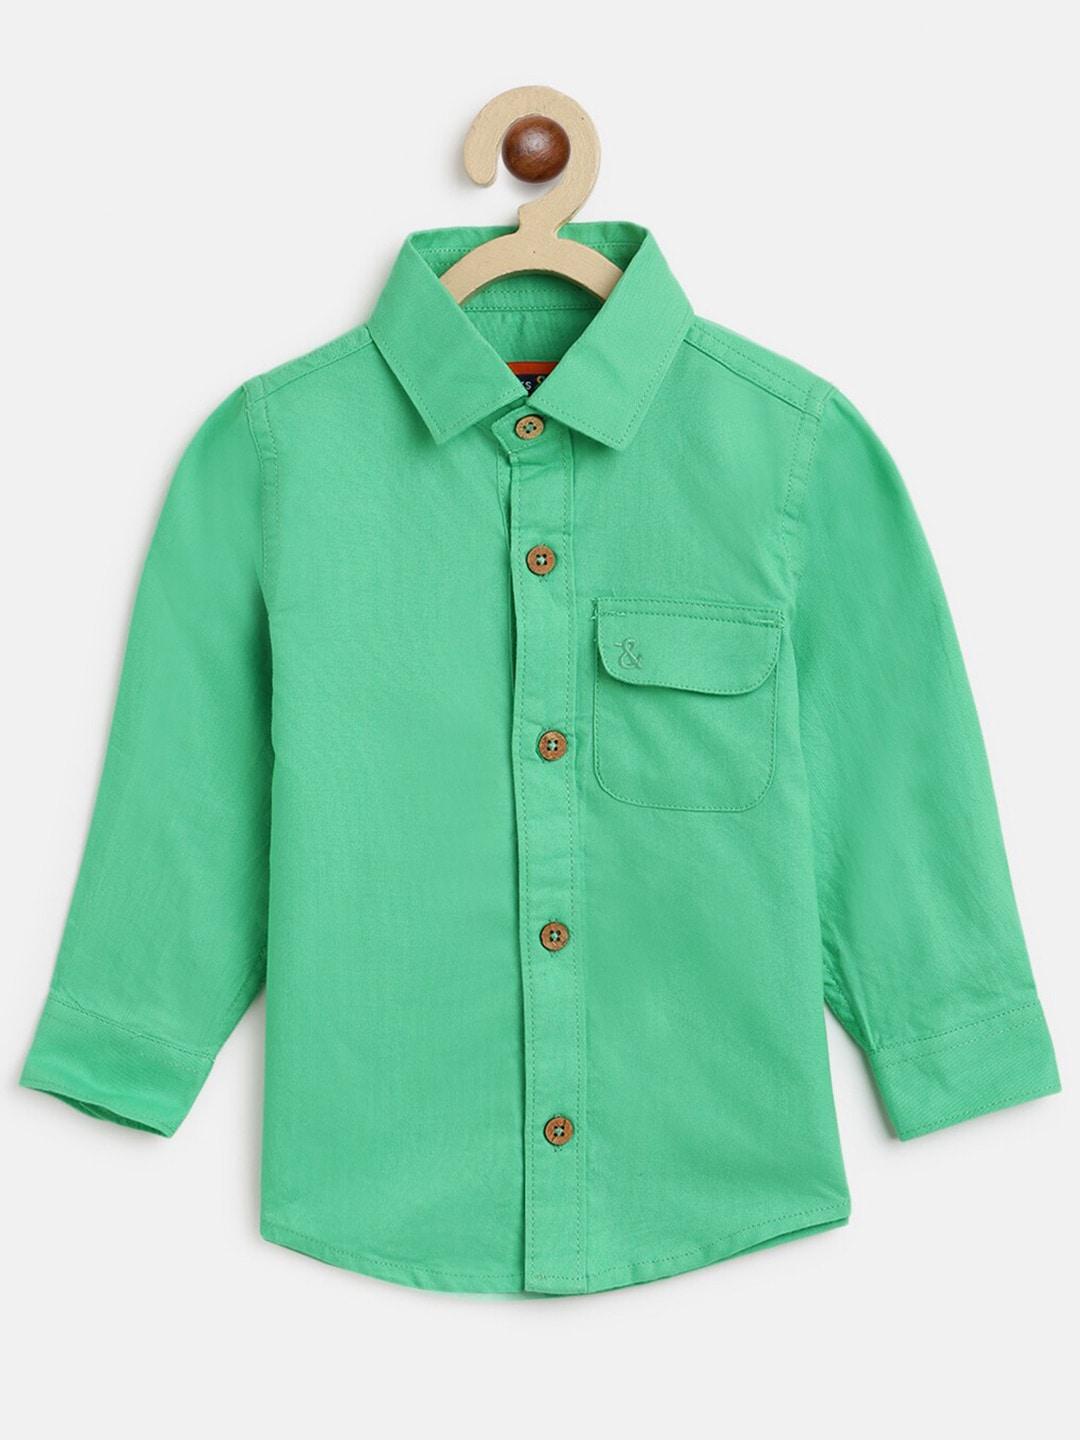 tales-&-stories-boys-green-cotton-casual-shirt